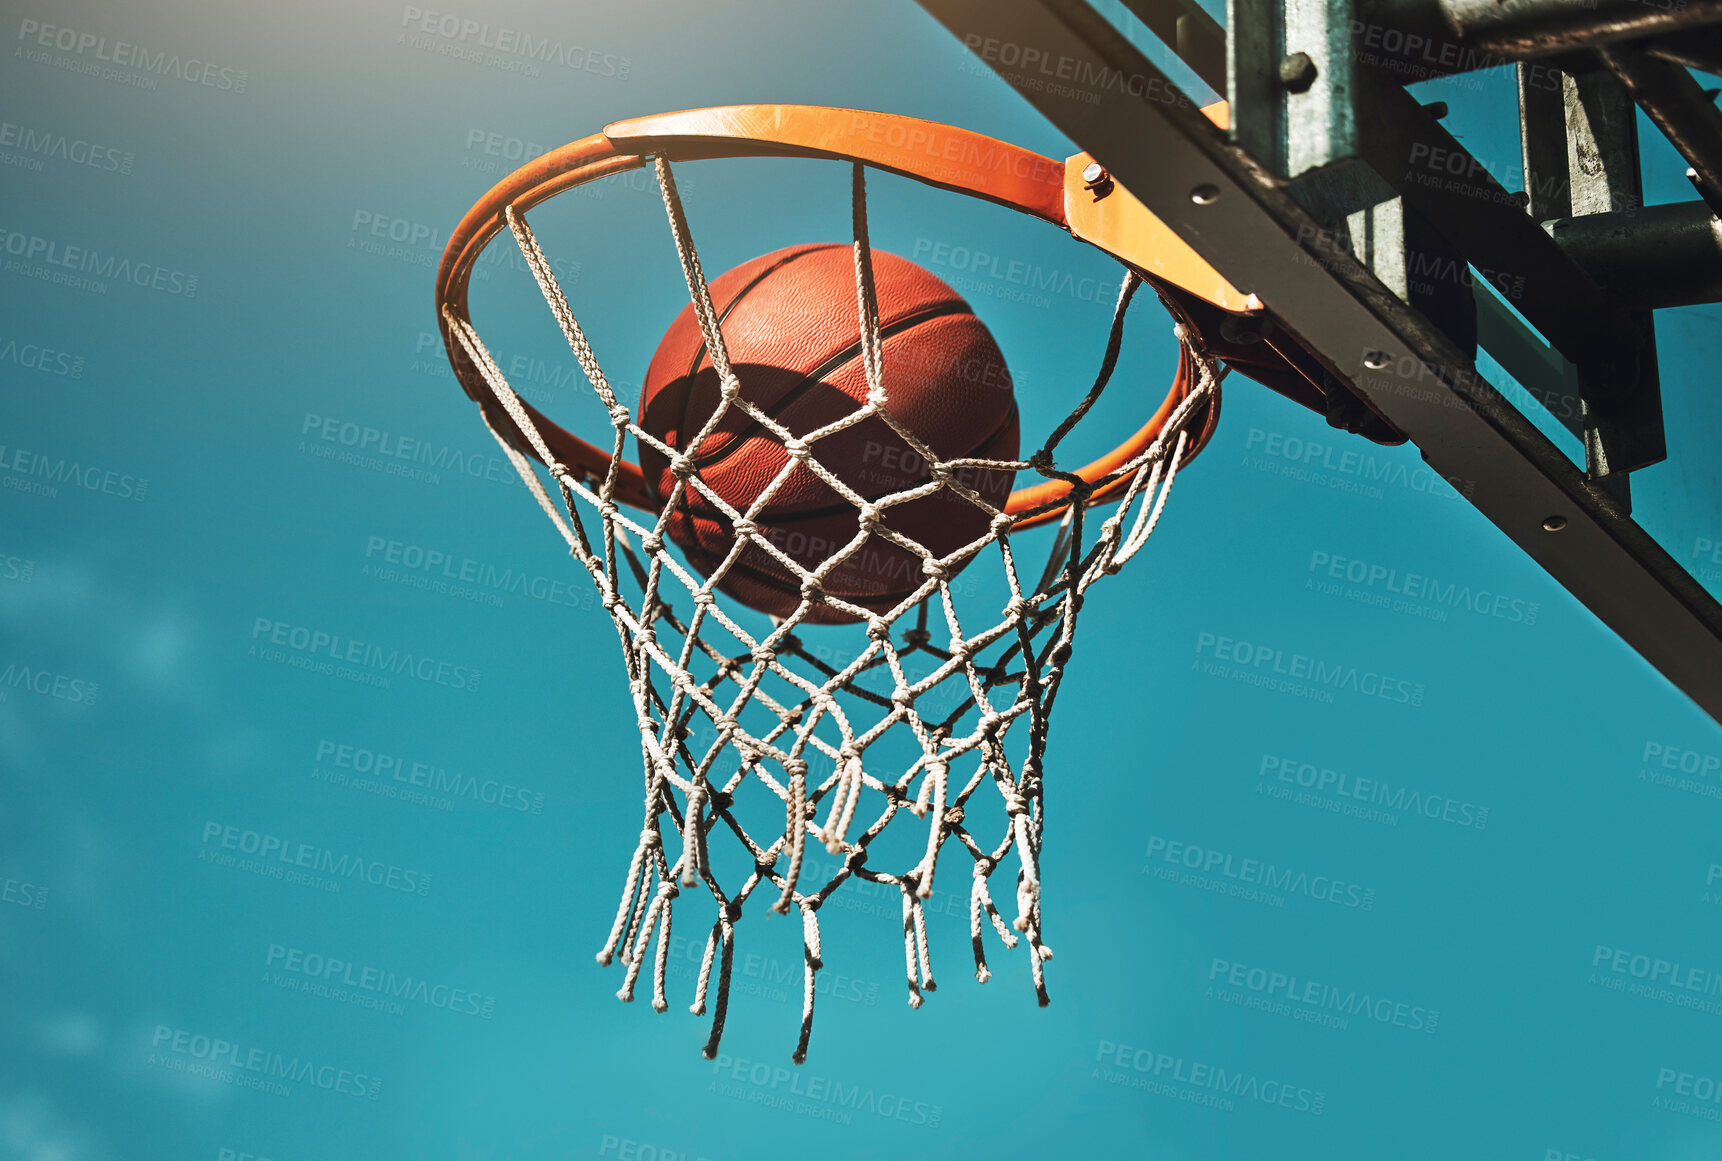 Buy stock photo Basketball, goal and target in basket for sports match training on outdoor athletic court. Aim, score and winner with ball dunk in net at competition practice from low angle with blue sky.

